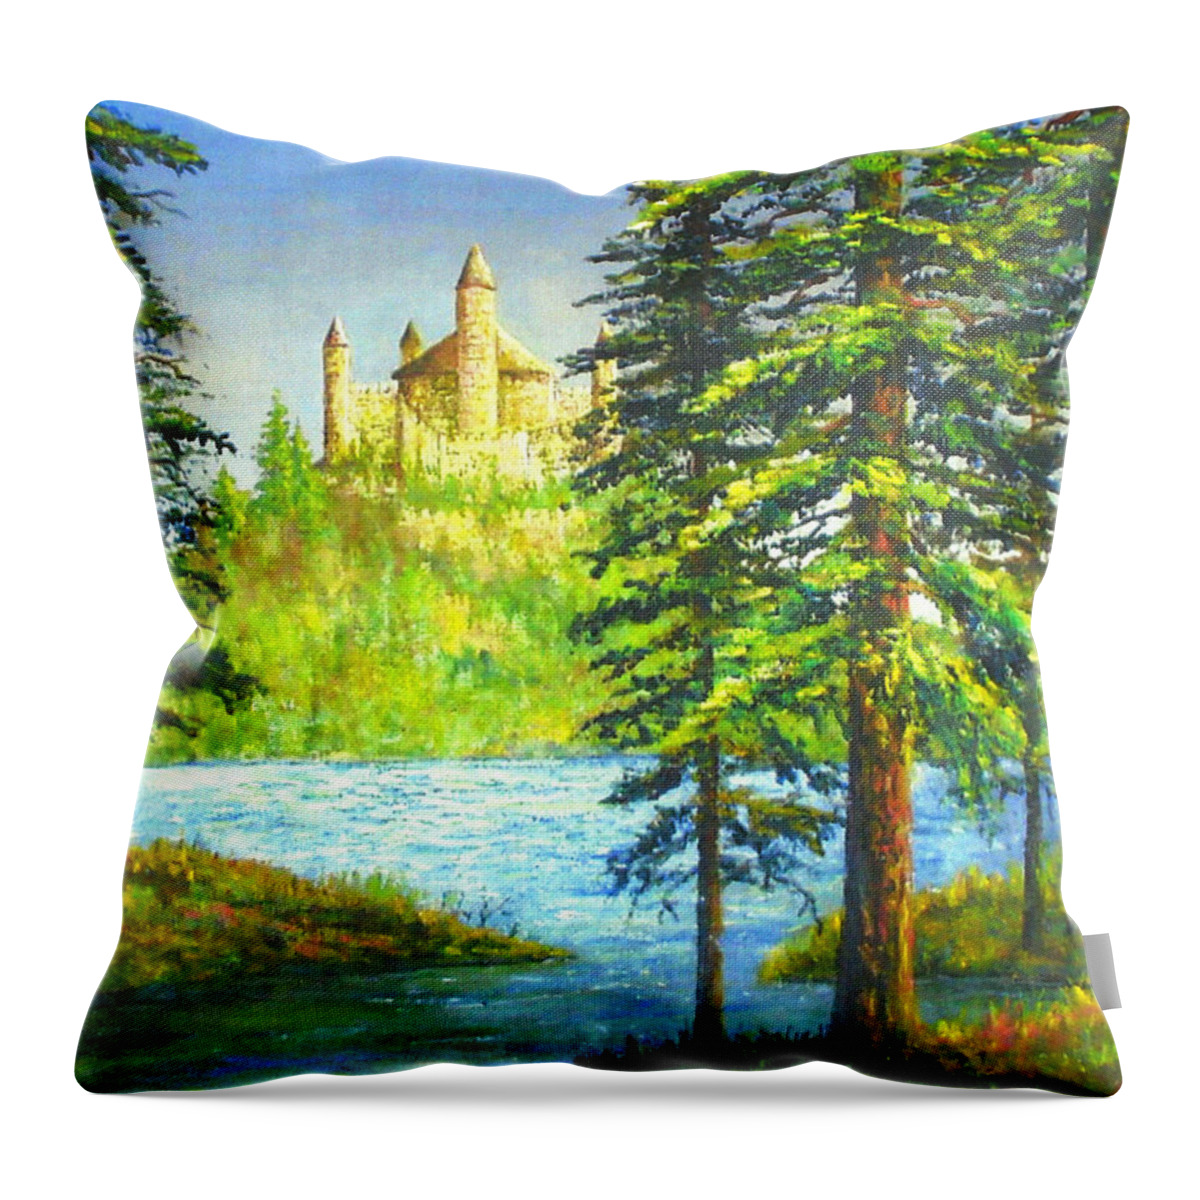 Castle Throw Pillow featuring the painting Fairy Tale Castle by Lou Ann Bagnall